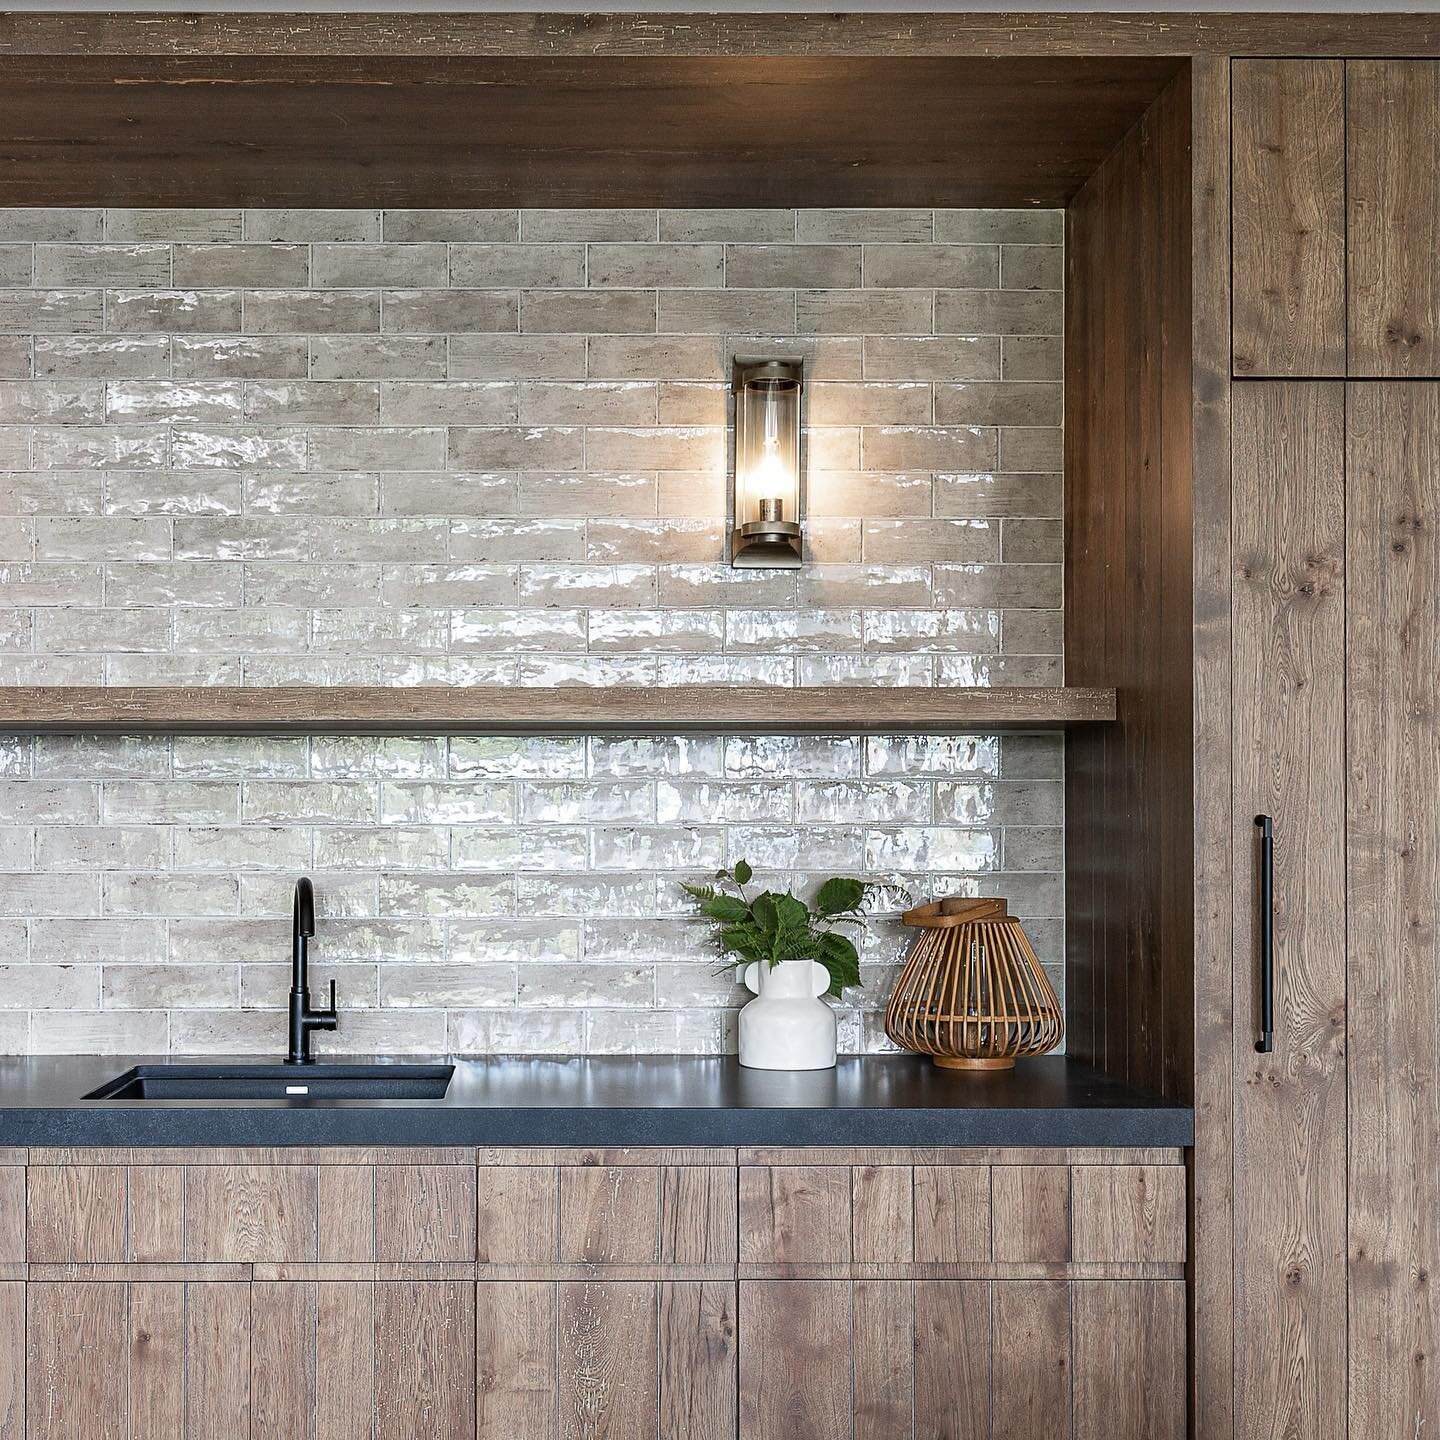 A basement refreshment bar doesn&rsquo;t have to be boring&hellip; in fact, it&rsquo;s a chance to have a different vibe than the rest of the house. Looking good, basement bar. Looking good. 

#hometohaven #gairdnerdesign #howihaven #basementkitchen 